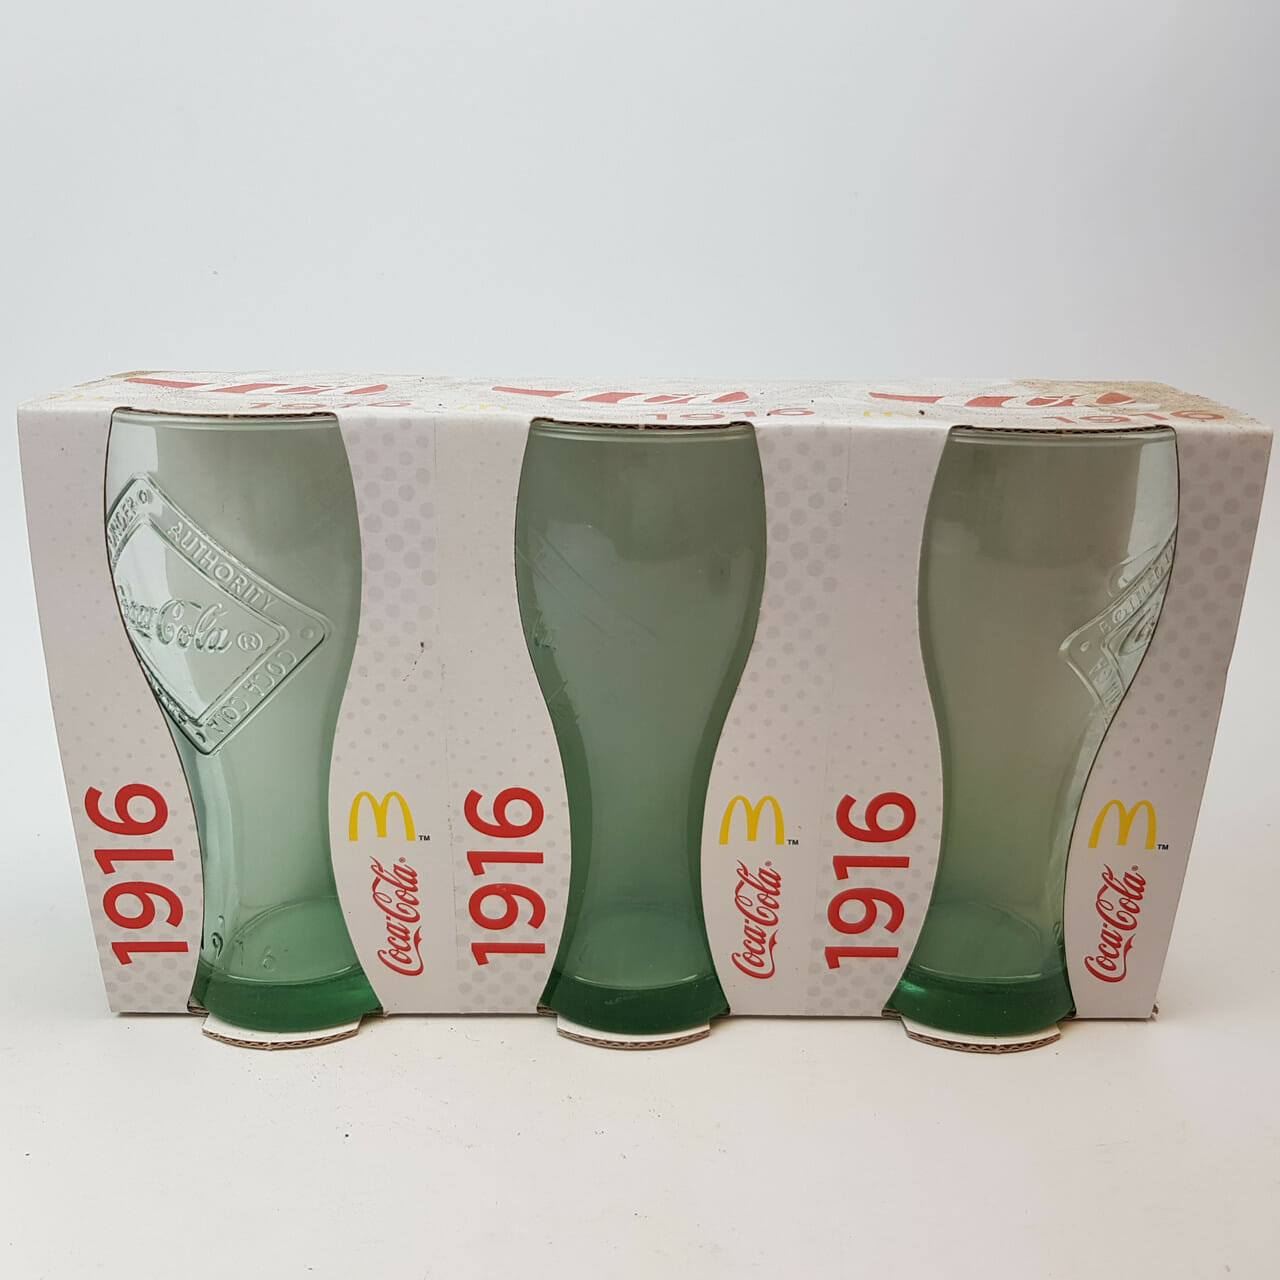 36x COCA COLA MCDONALDS GLASSES 2015 COLLECTIONS CELEBRATING 100 YEARS #51685